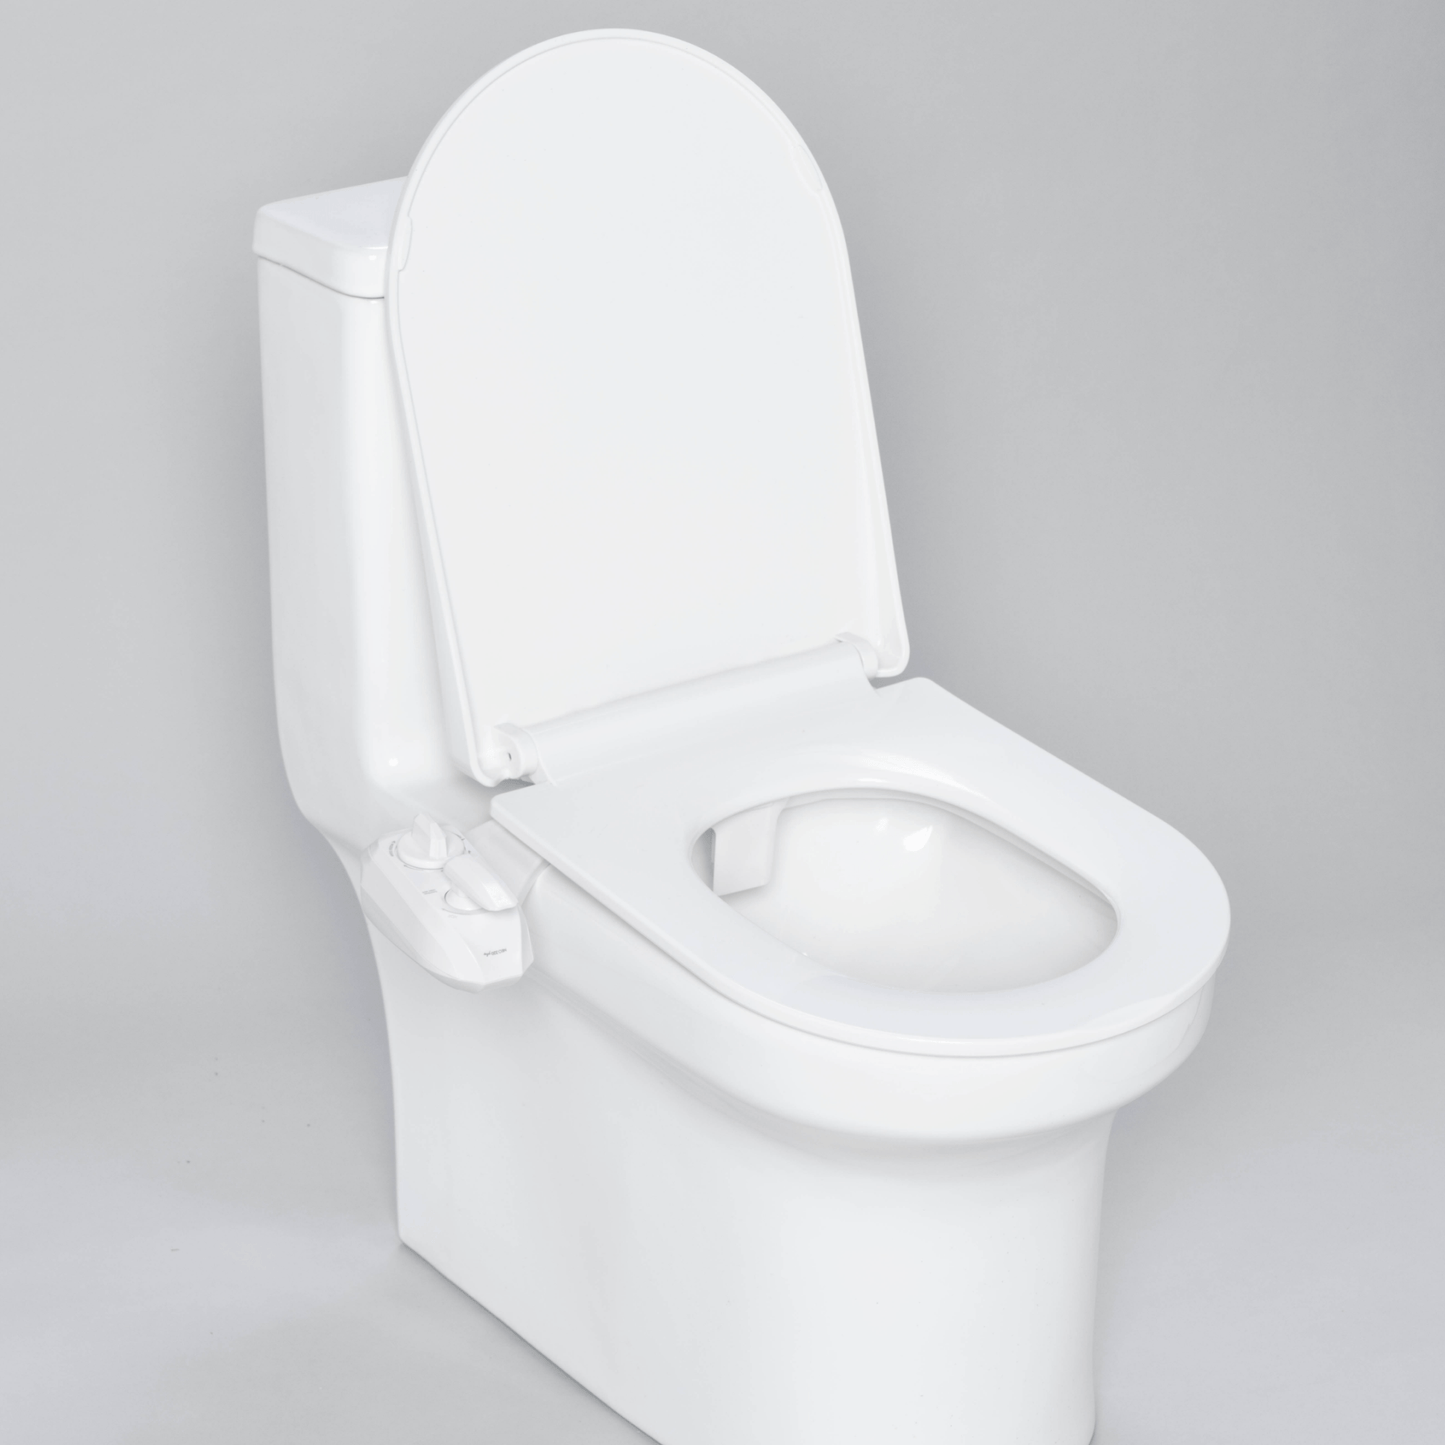 NEO 320 Plus White installed on a modern toilet, with lid open